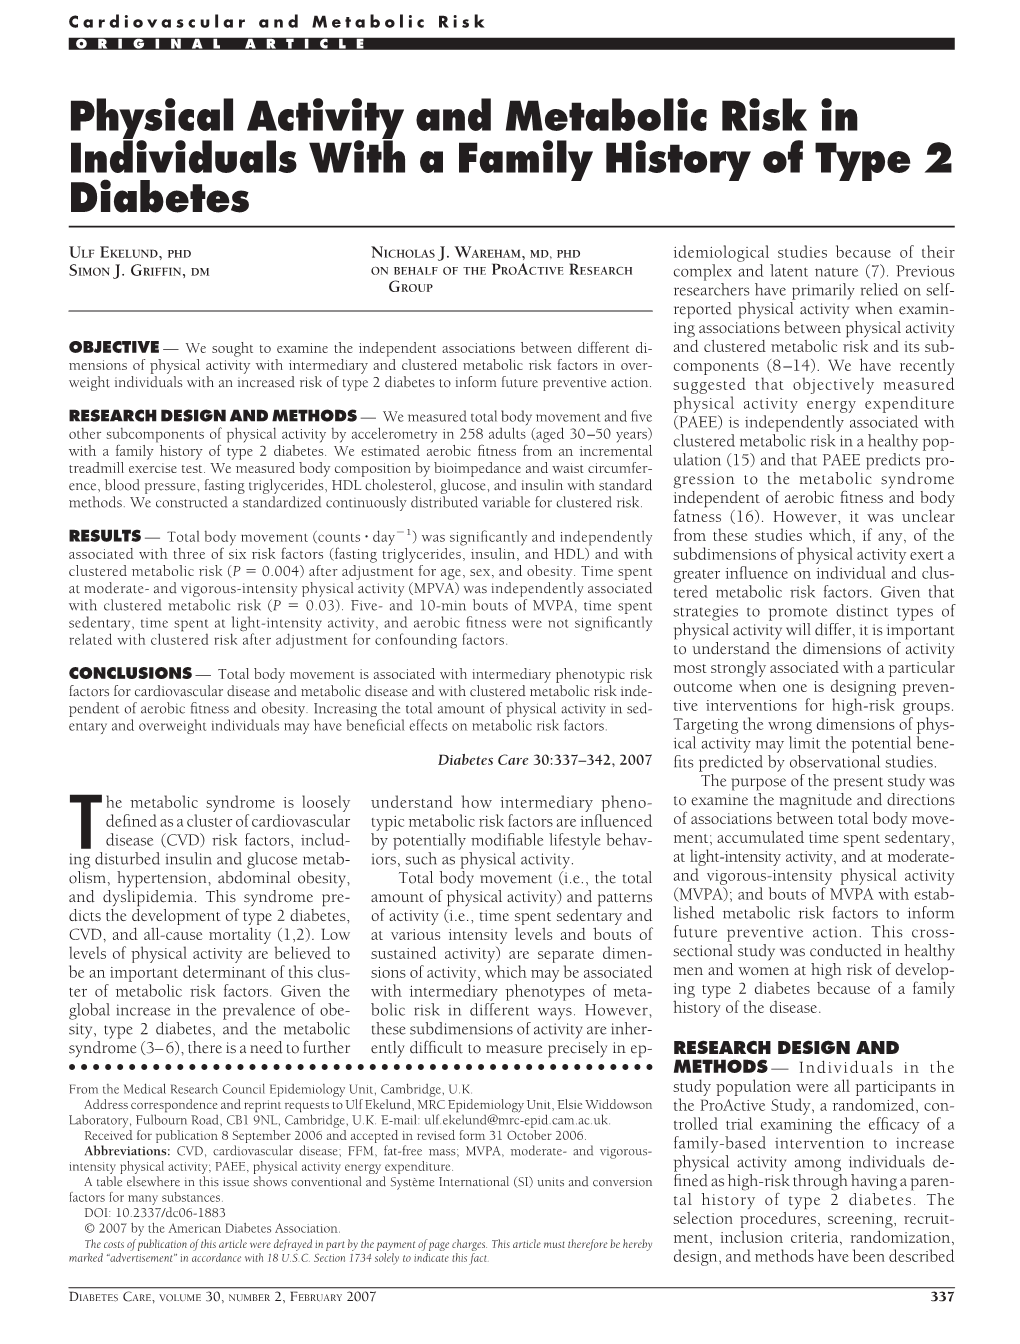 Physical Activity and Metabolic Risk in Individuals with a Family History of Type 2 Diabetes